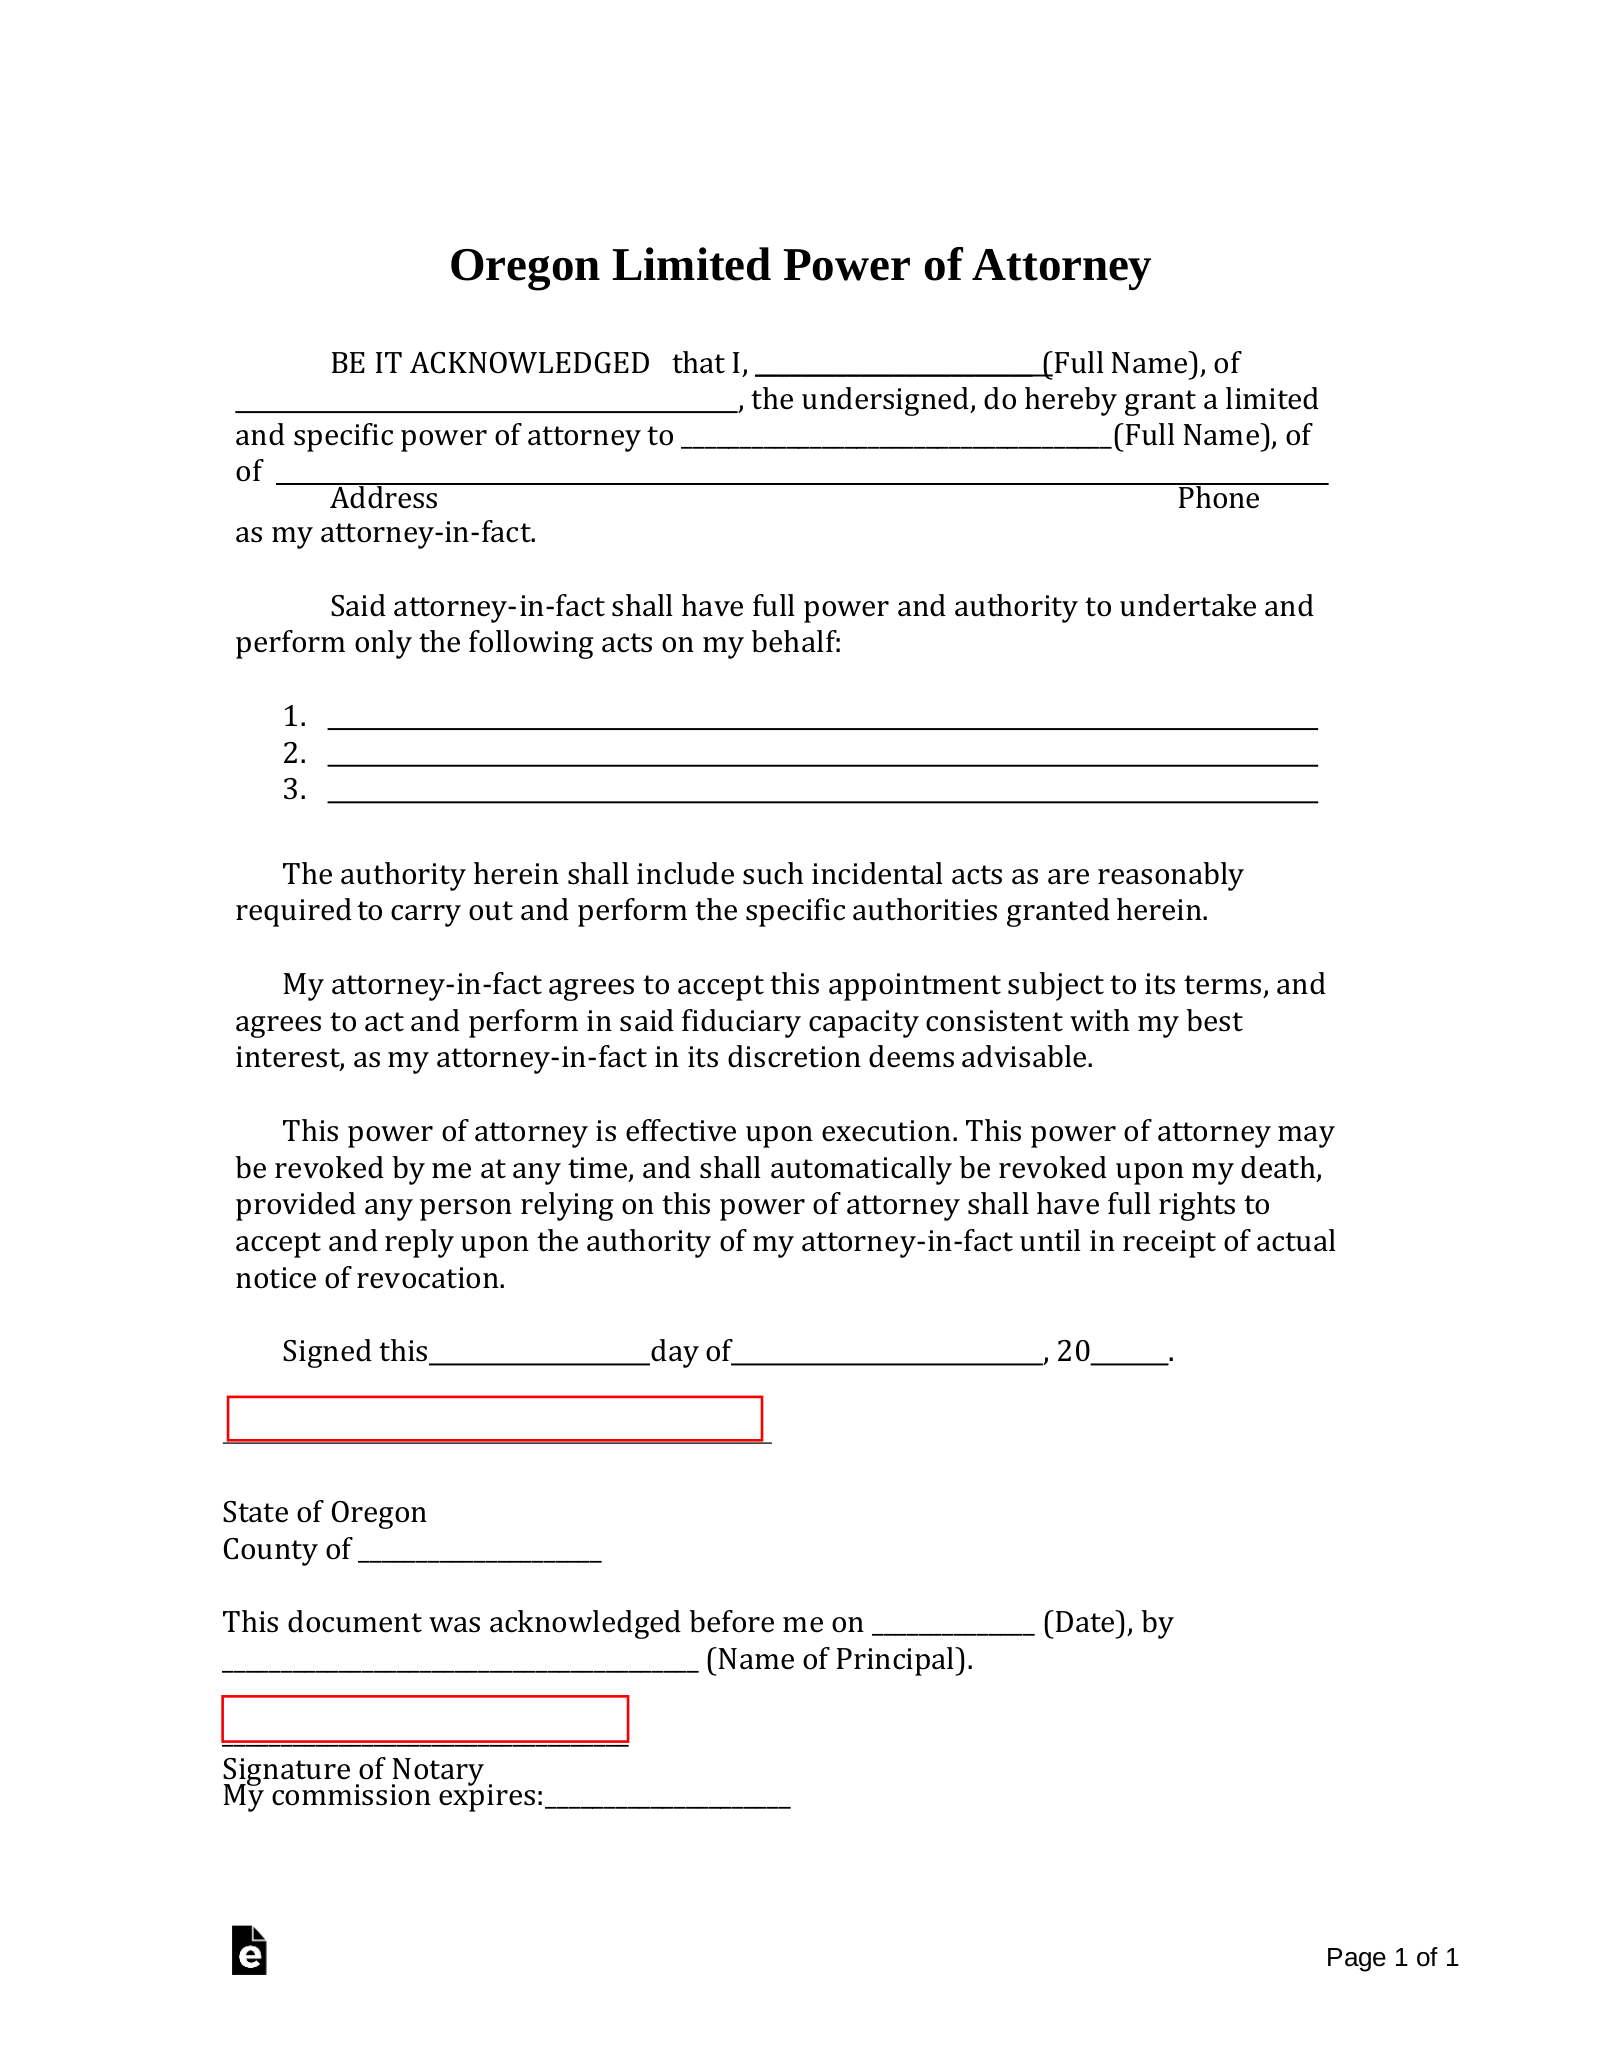 Oregon Limited Power of Attorney Form